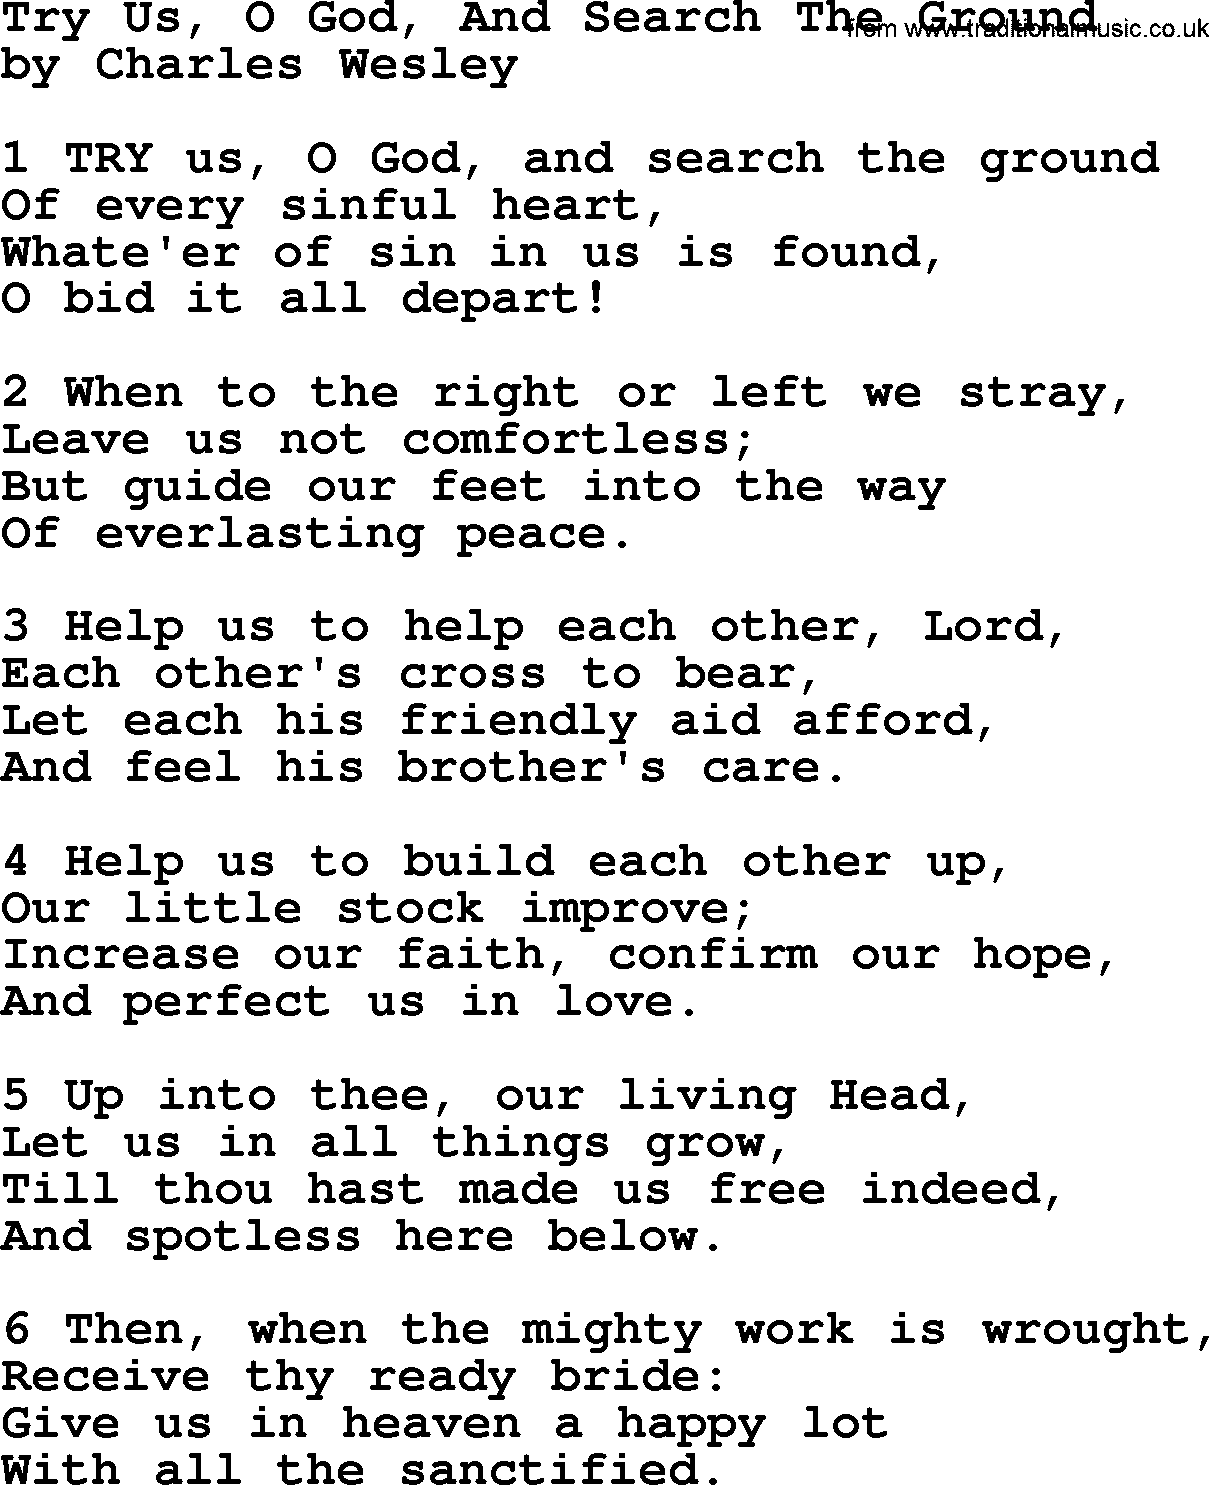 Charles Wesley hymn: Try Us, O God, And Search The Ground, lyrics